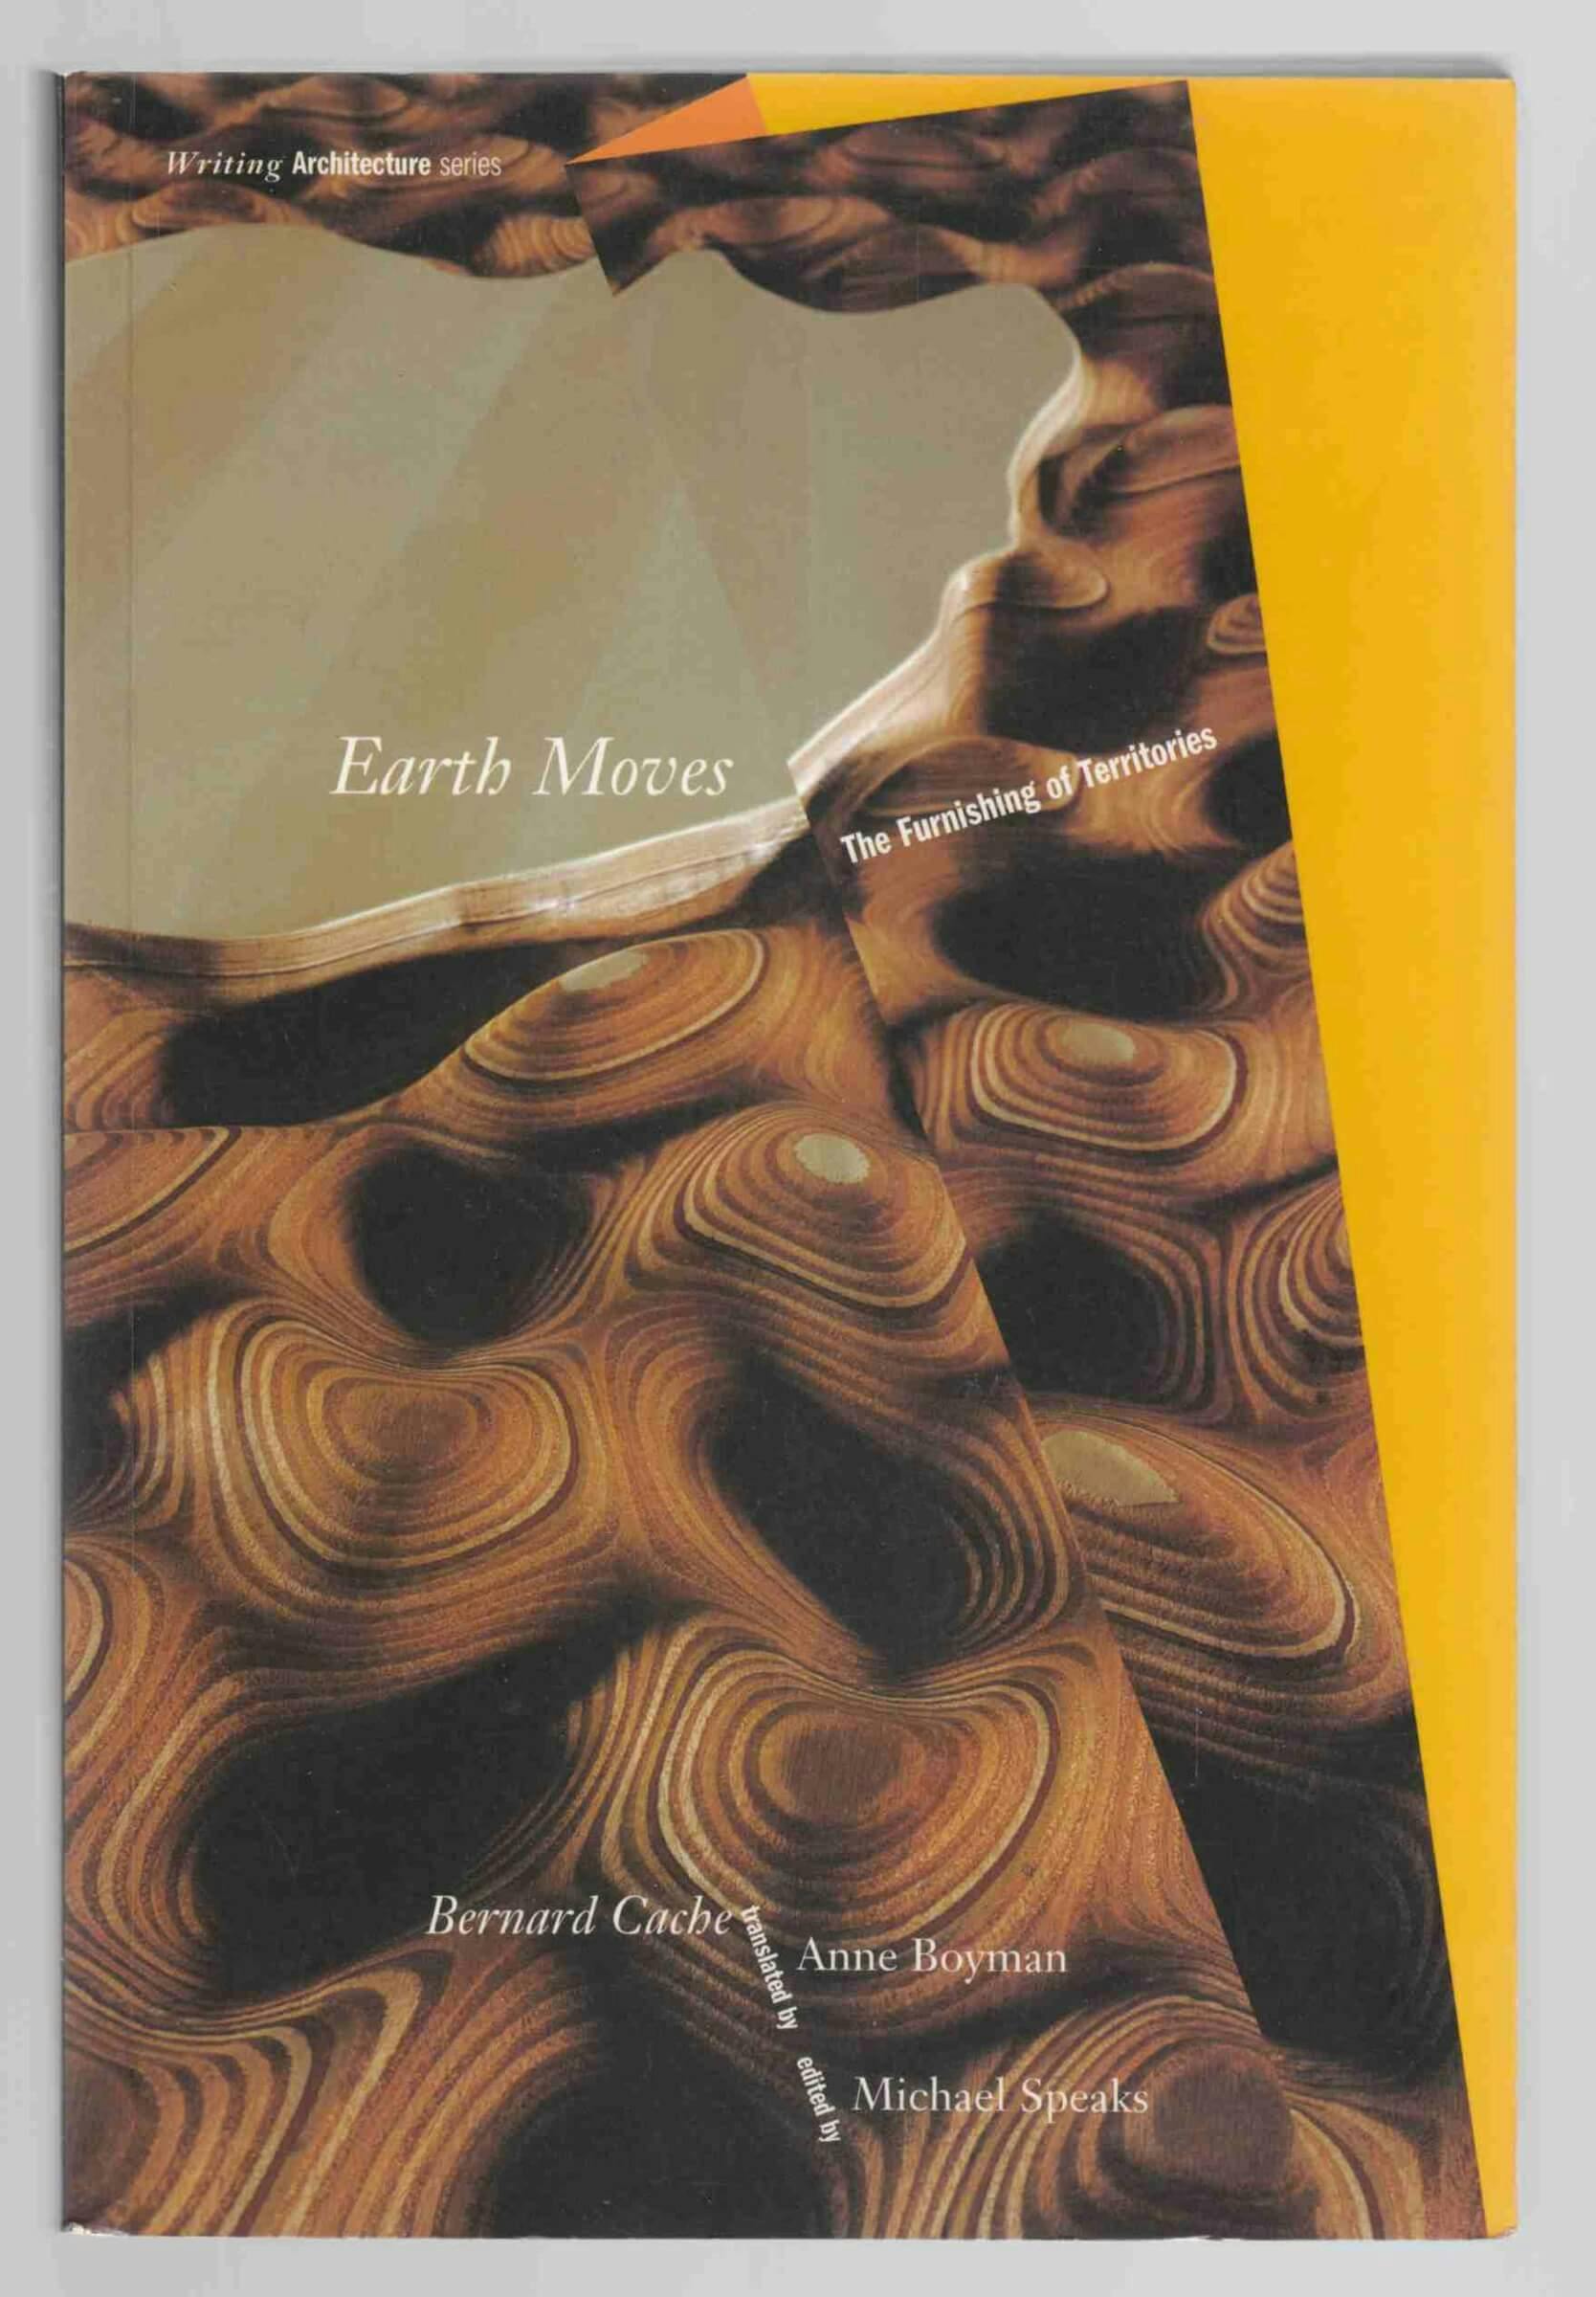 Earth Moves: The Furnishing of Territories, by Bernard Cache. Source: Riverwash Books